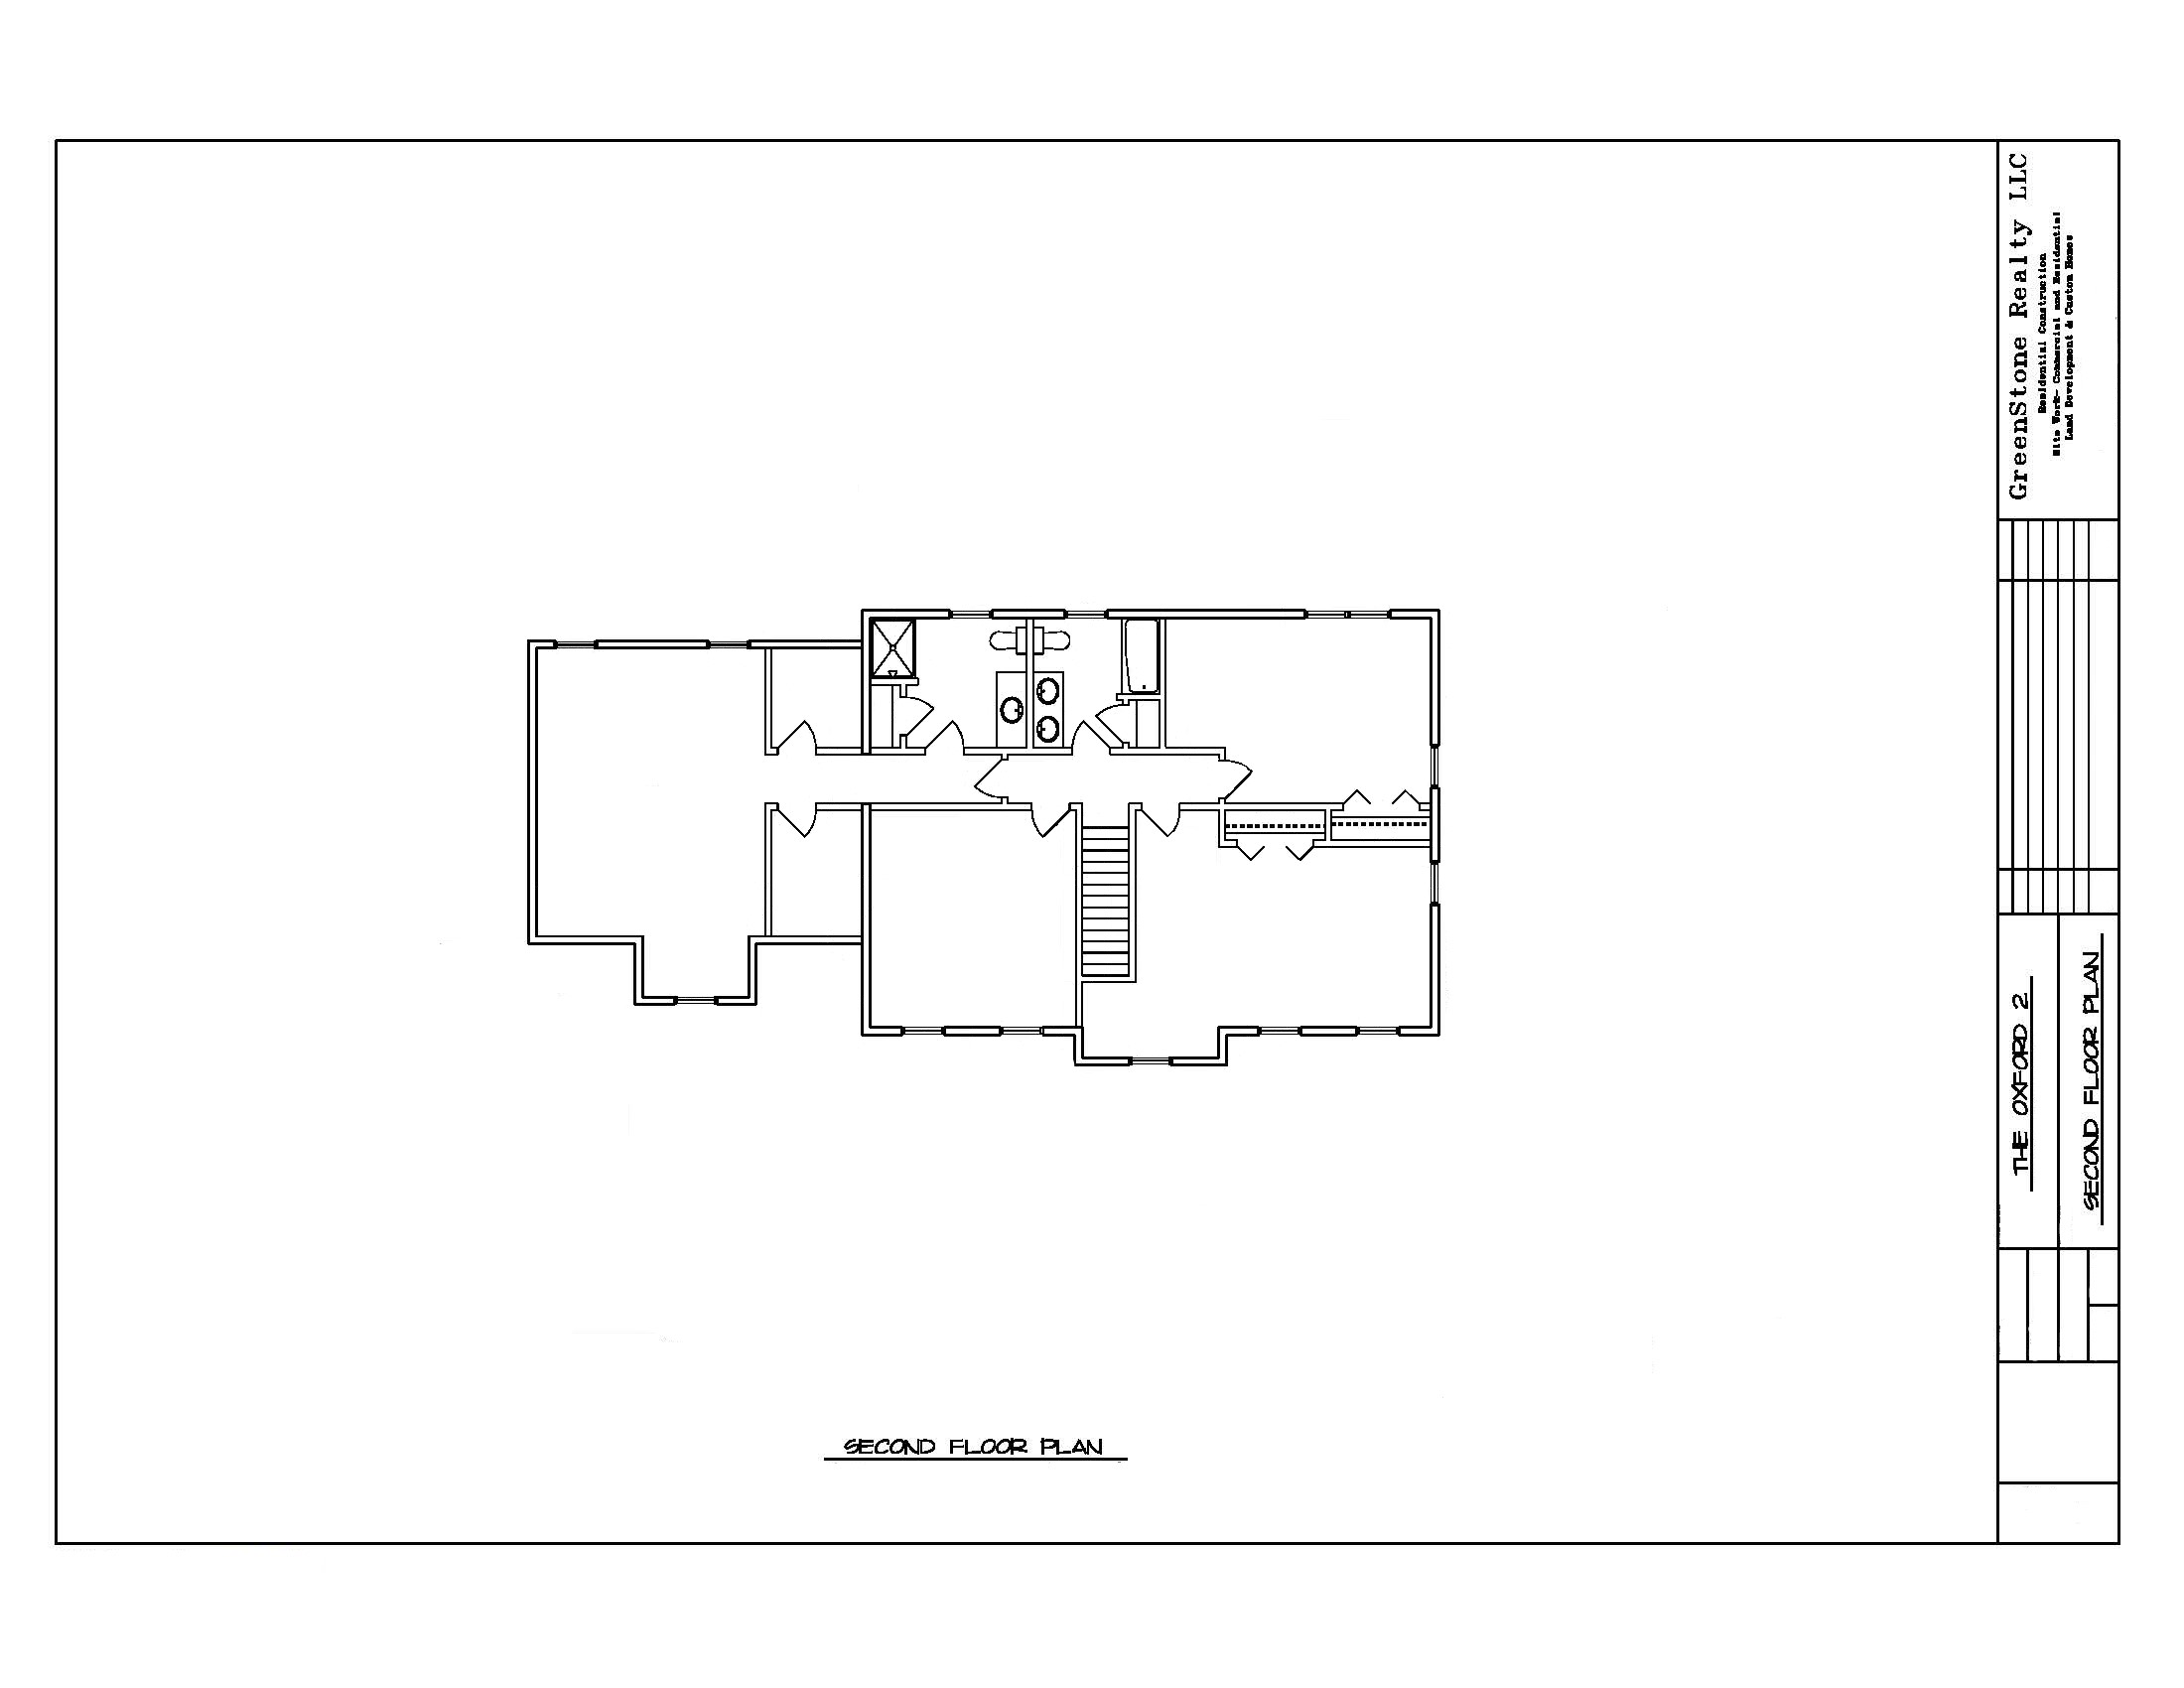 The Oxford Second Floor Plan